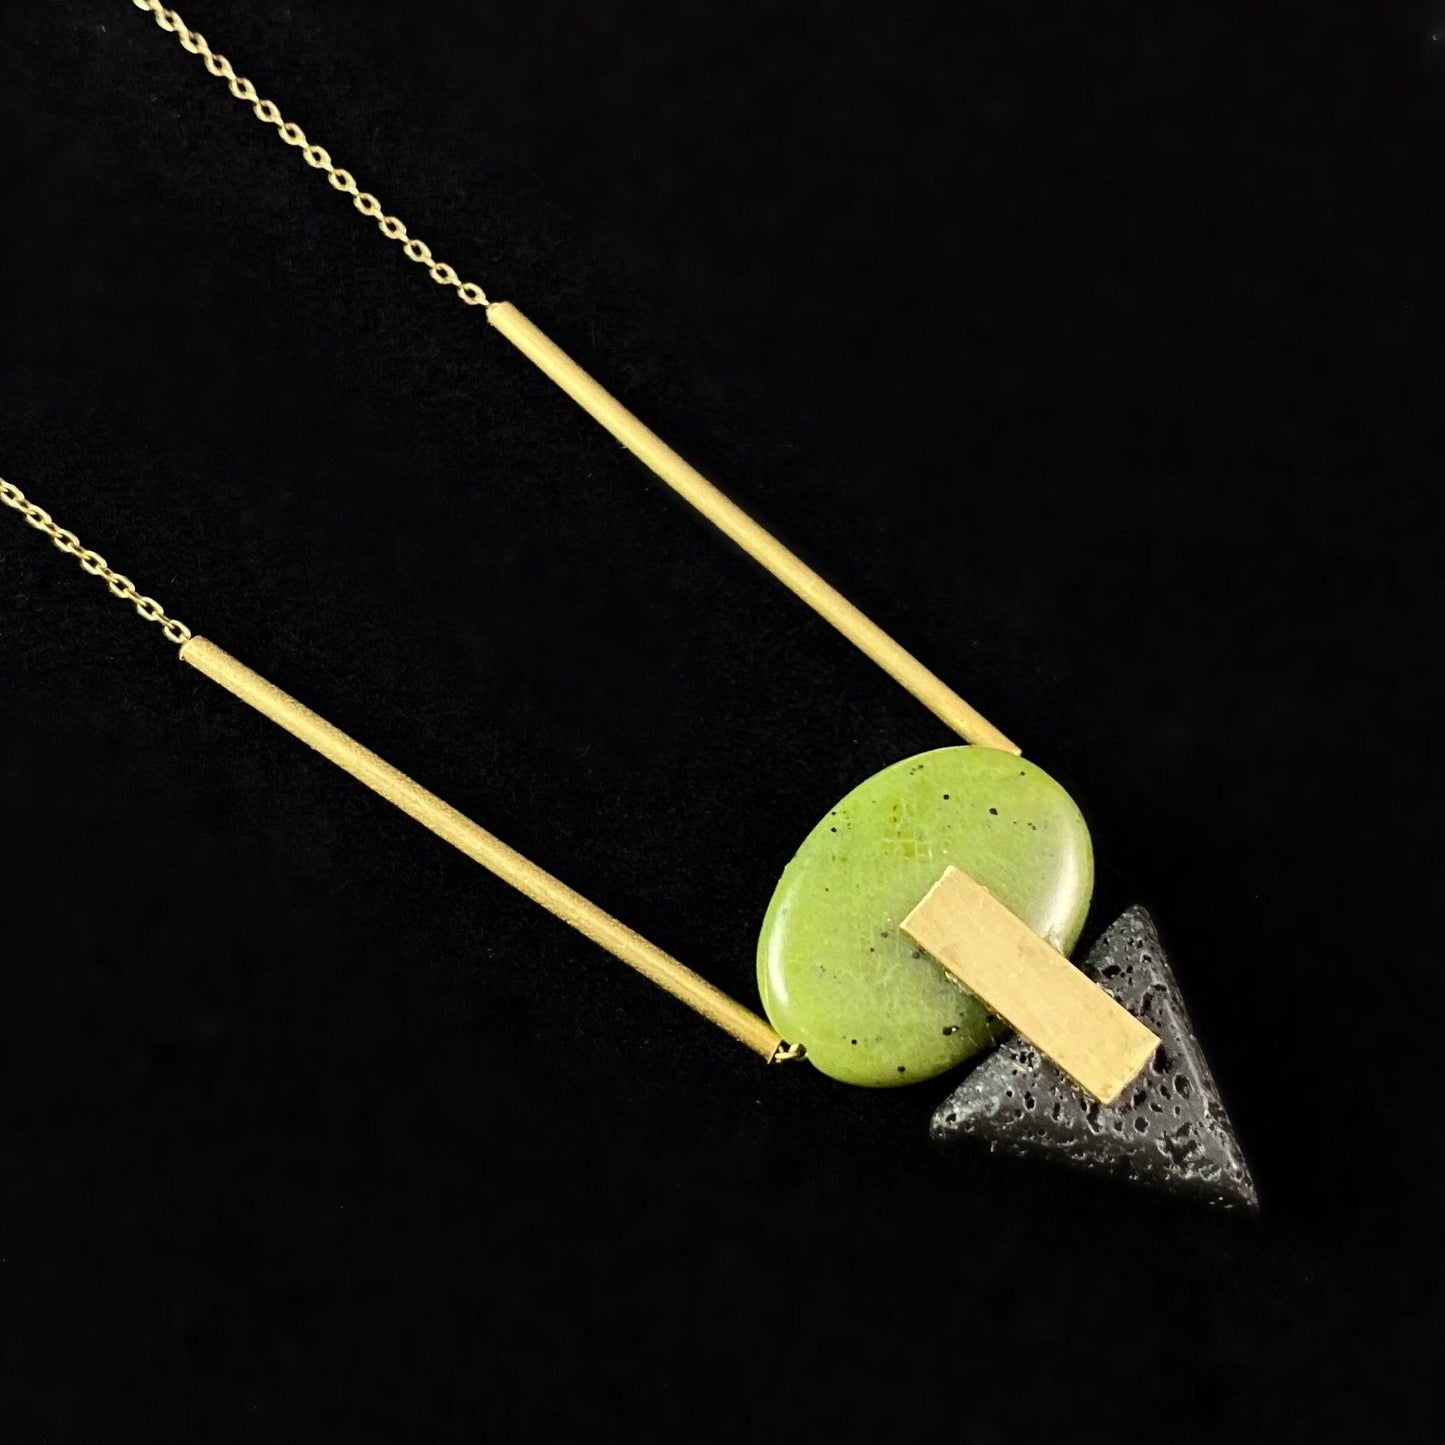 Gold Geometric Art Deco Pendant Necklace - Jade and Lava Stone Necklace with 18kt Gold Plated Detailing, David Aubrey Jewelry